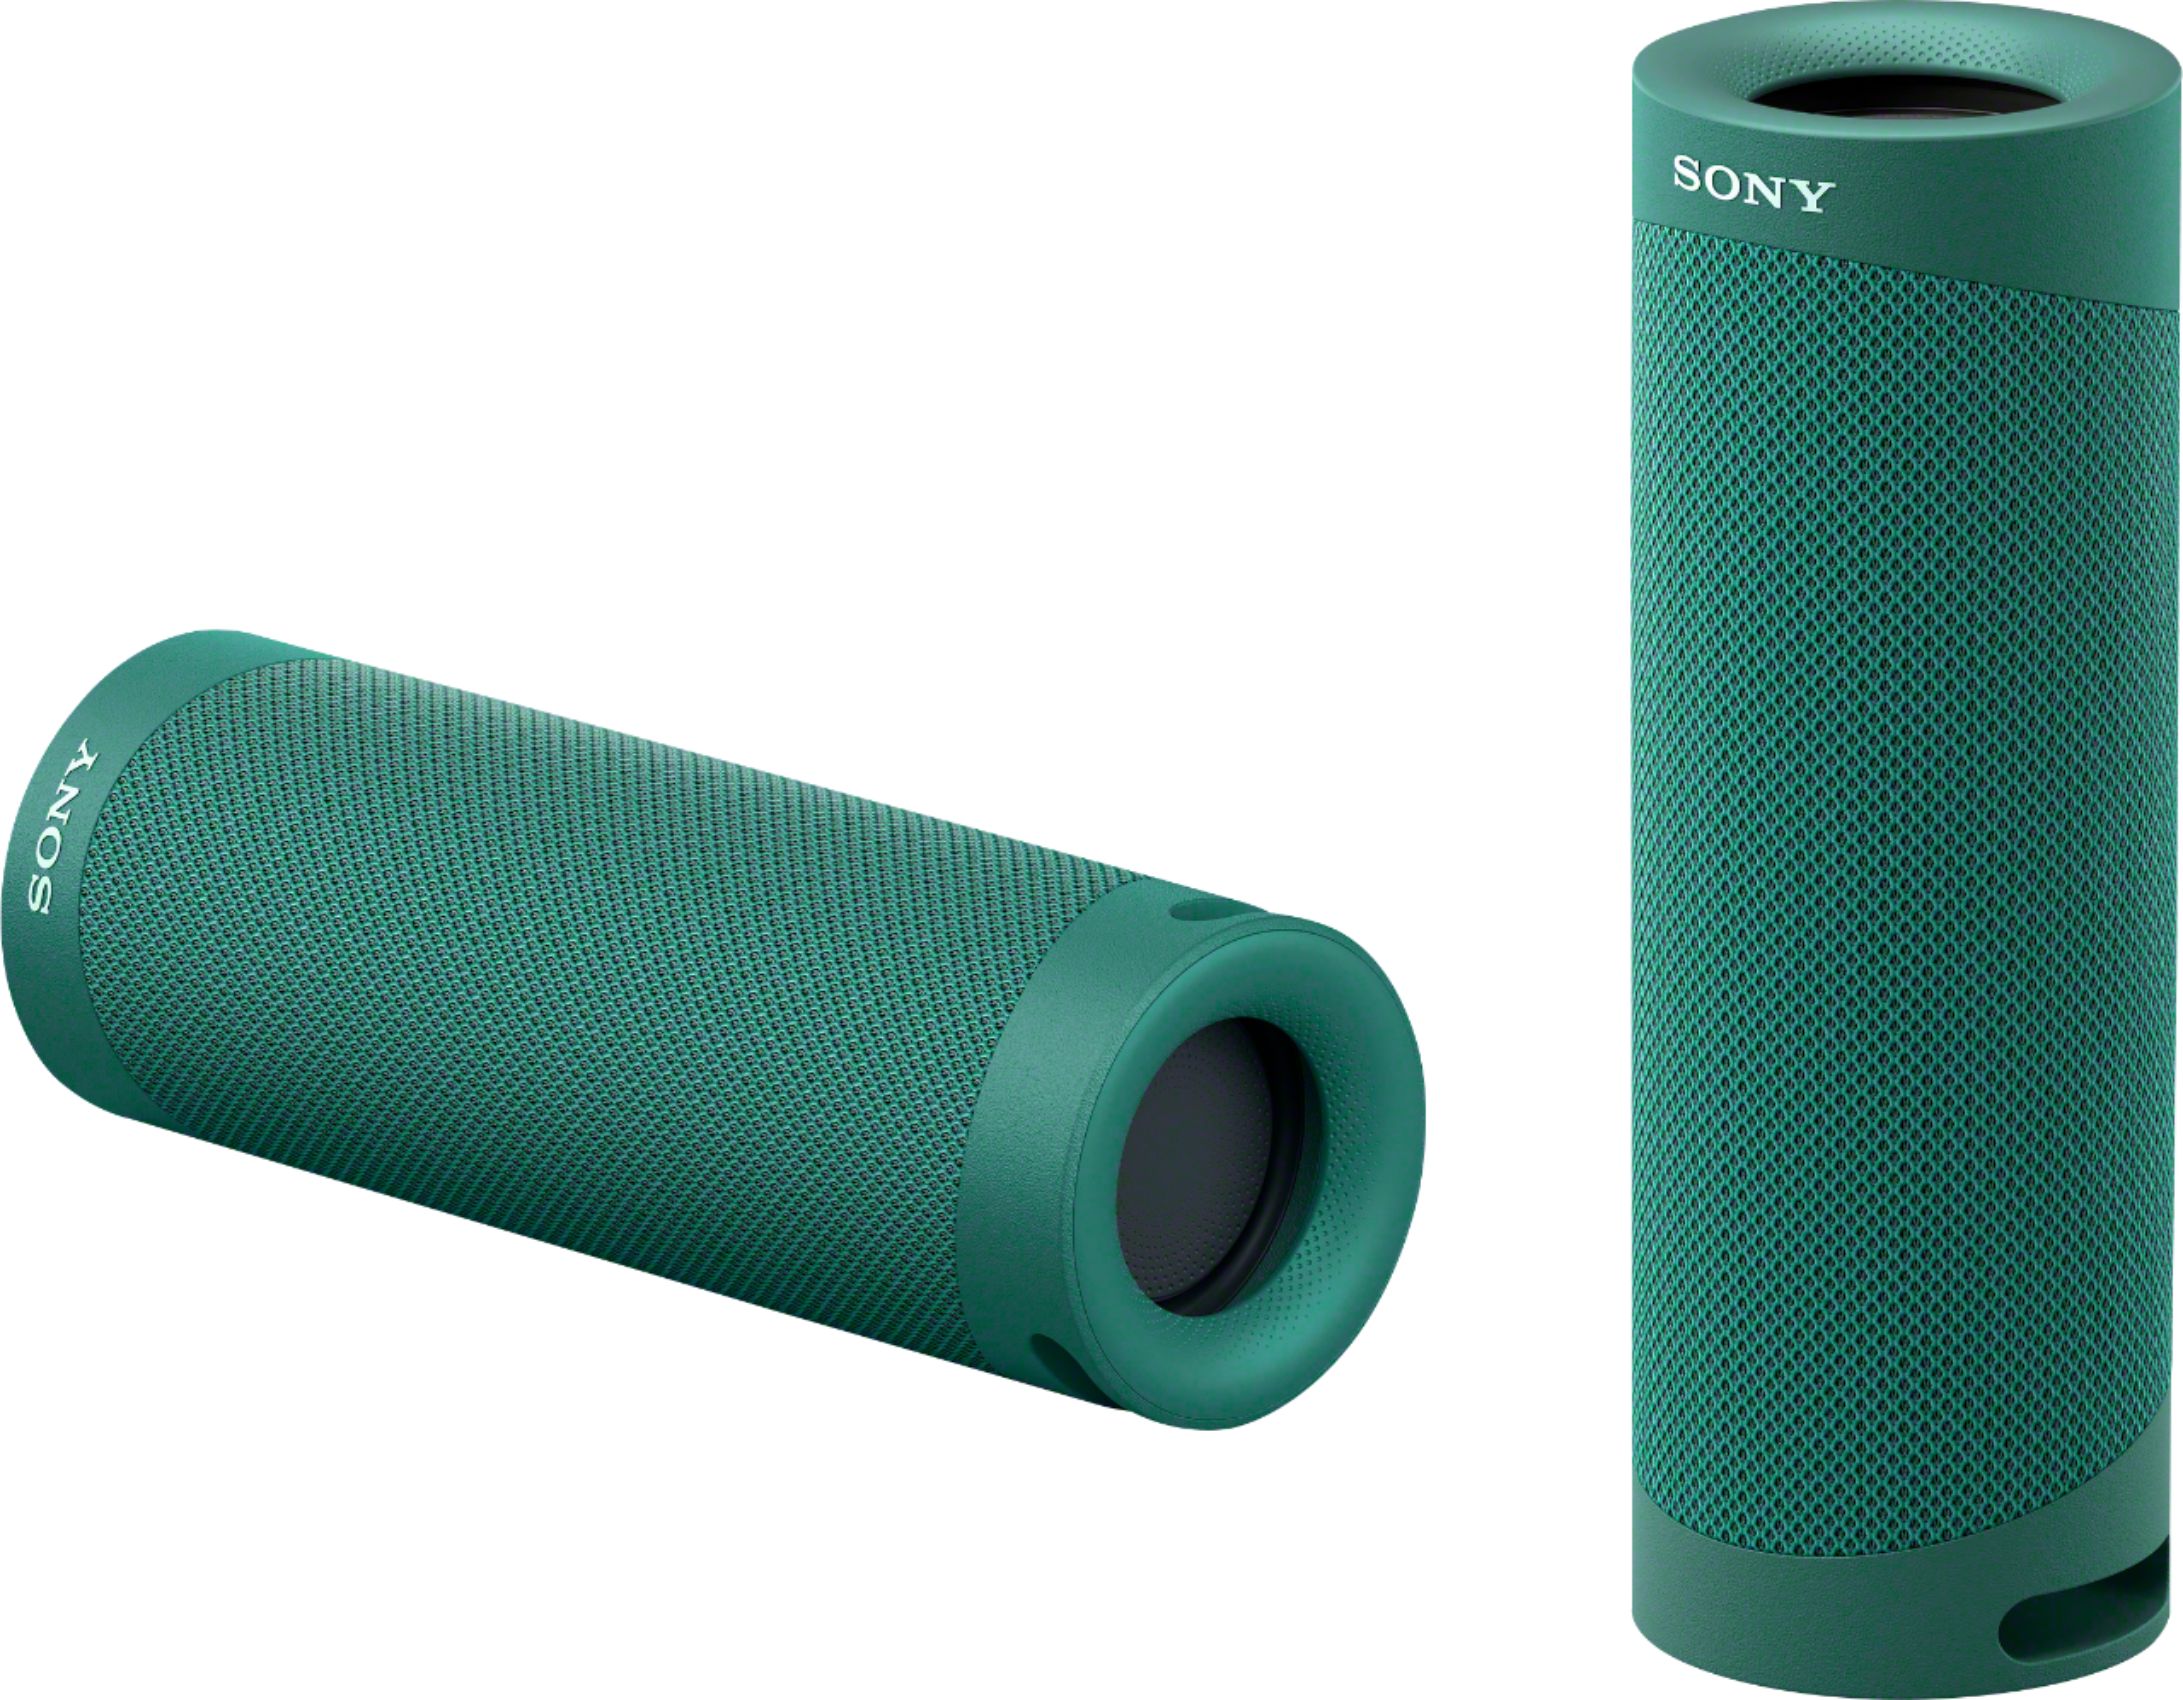 Angle View: Sony - SRS-XB23 Portable Bluetooth Speaker - Olive Green